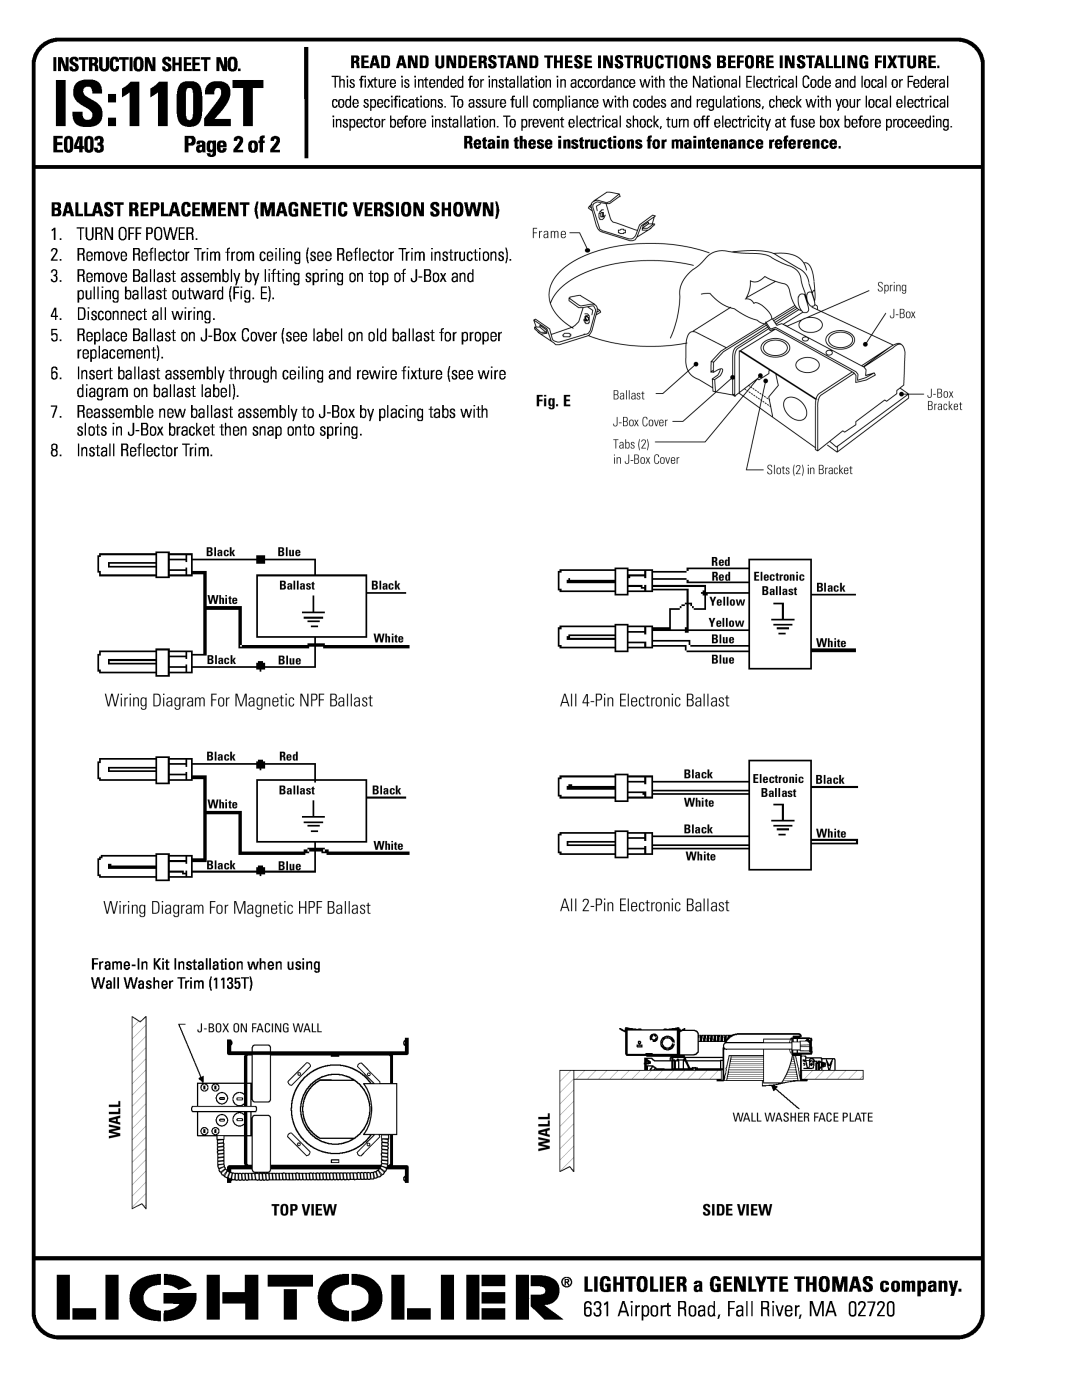 Lightolier IS:1102T instruction sheet Ballast Replacement Magnetic Version Shown, IS 1102T, E0403, Instruction Sheet No 